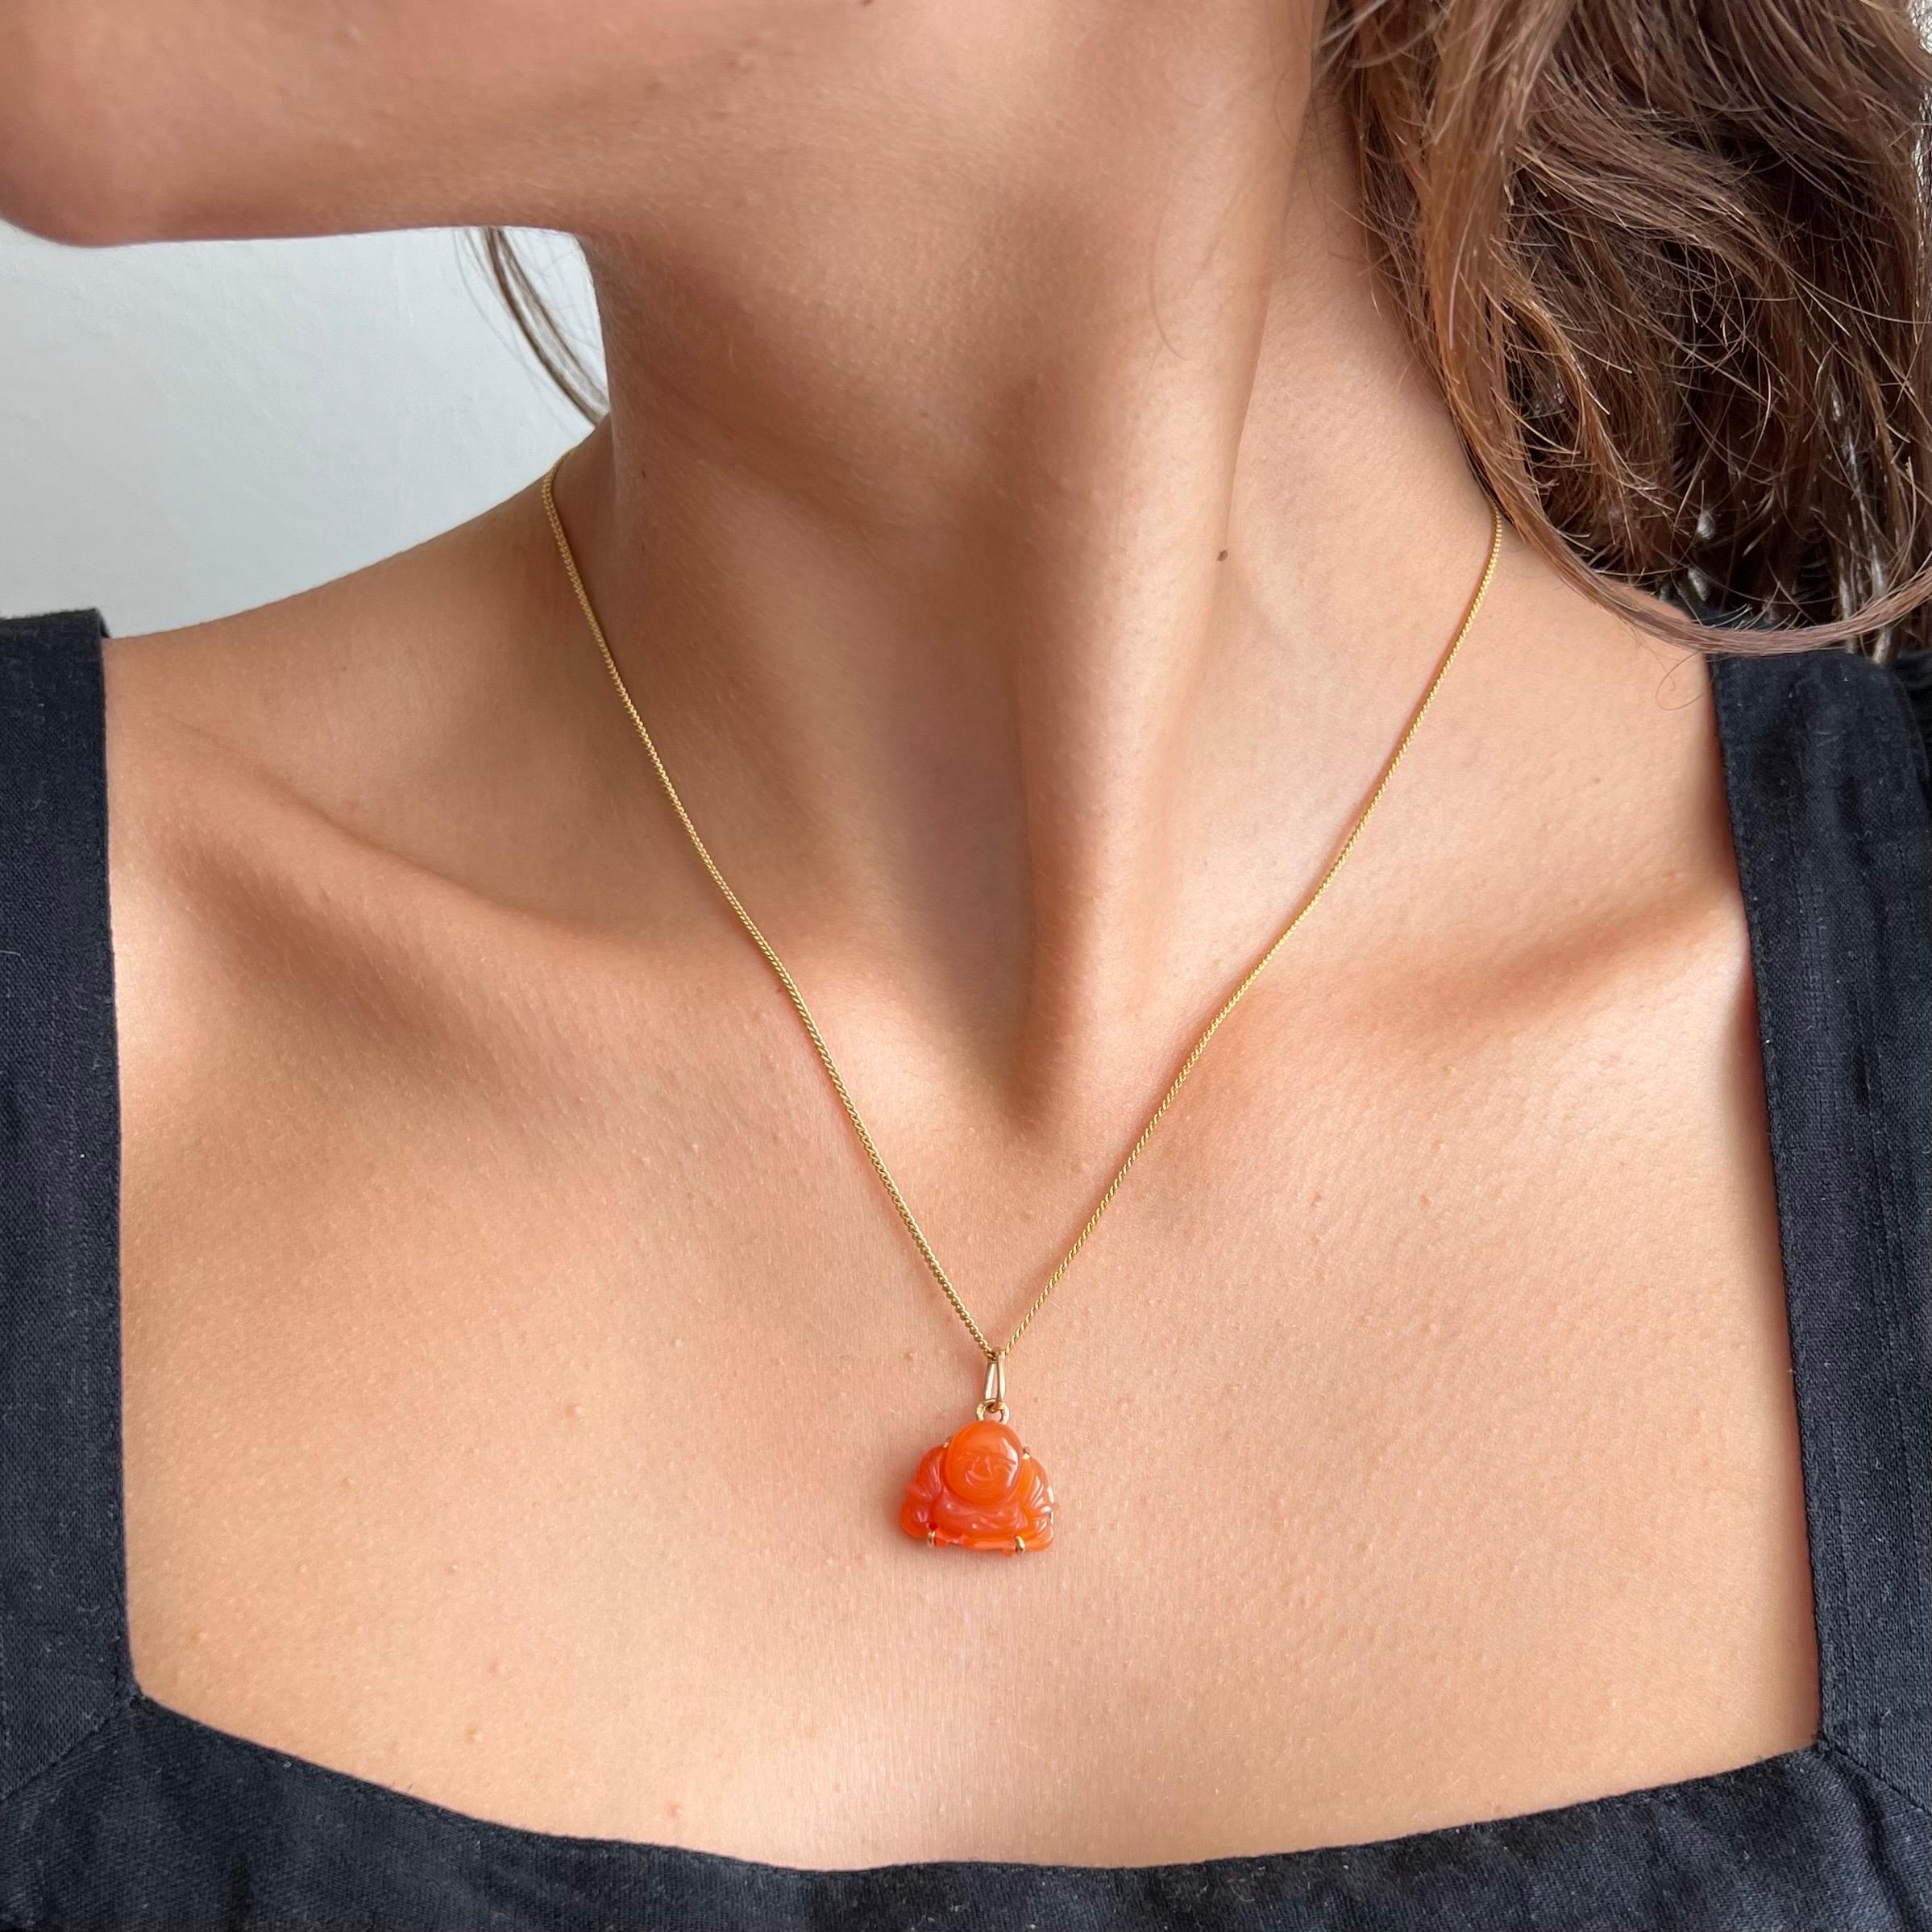 A vintage buddha charm pendant made of carnelian and set in a 14 karat gold frame. The color of this lovely carnelian buddha has a beautiful orangish hue. 

Collect your own charms as wearable memories, it has a symbolic and often a sentimental